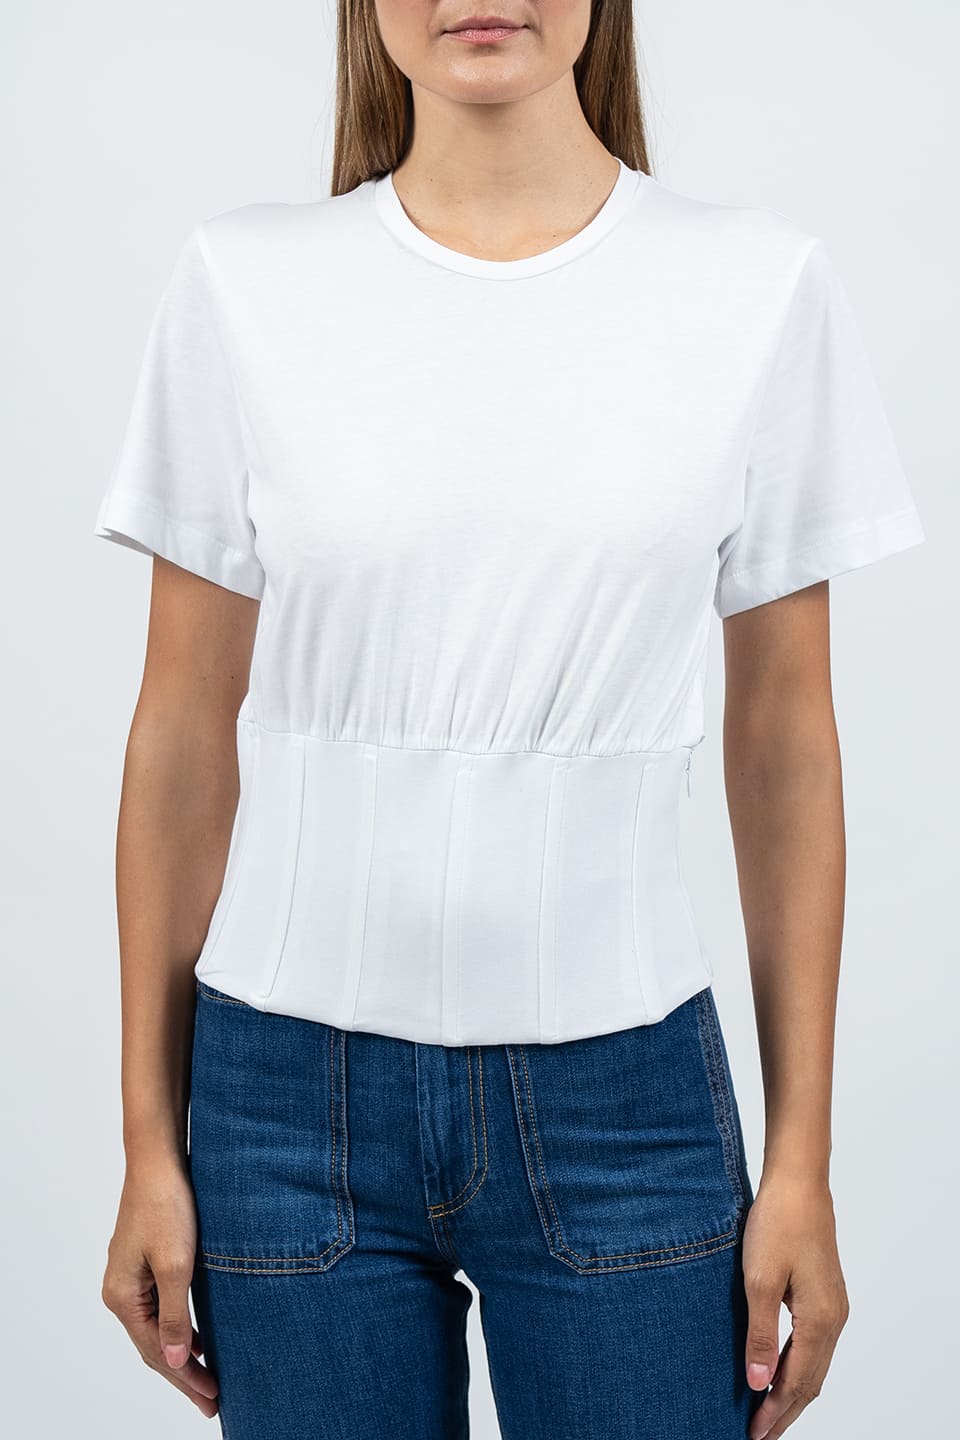 Thumbnail for Product gallery 1, White Cotton T-Shirt